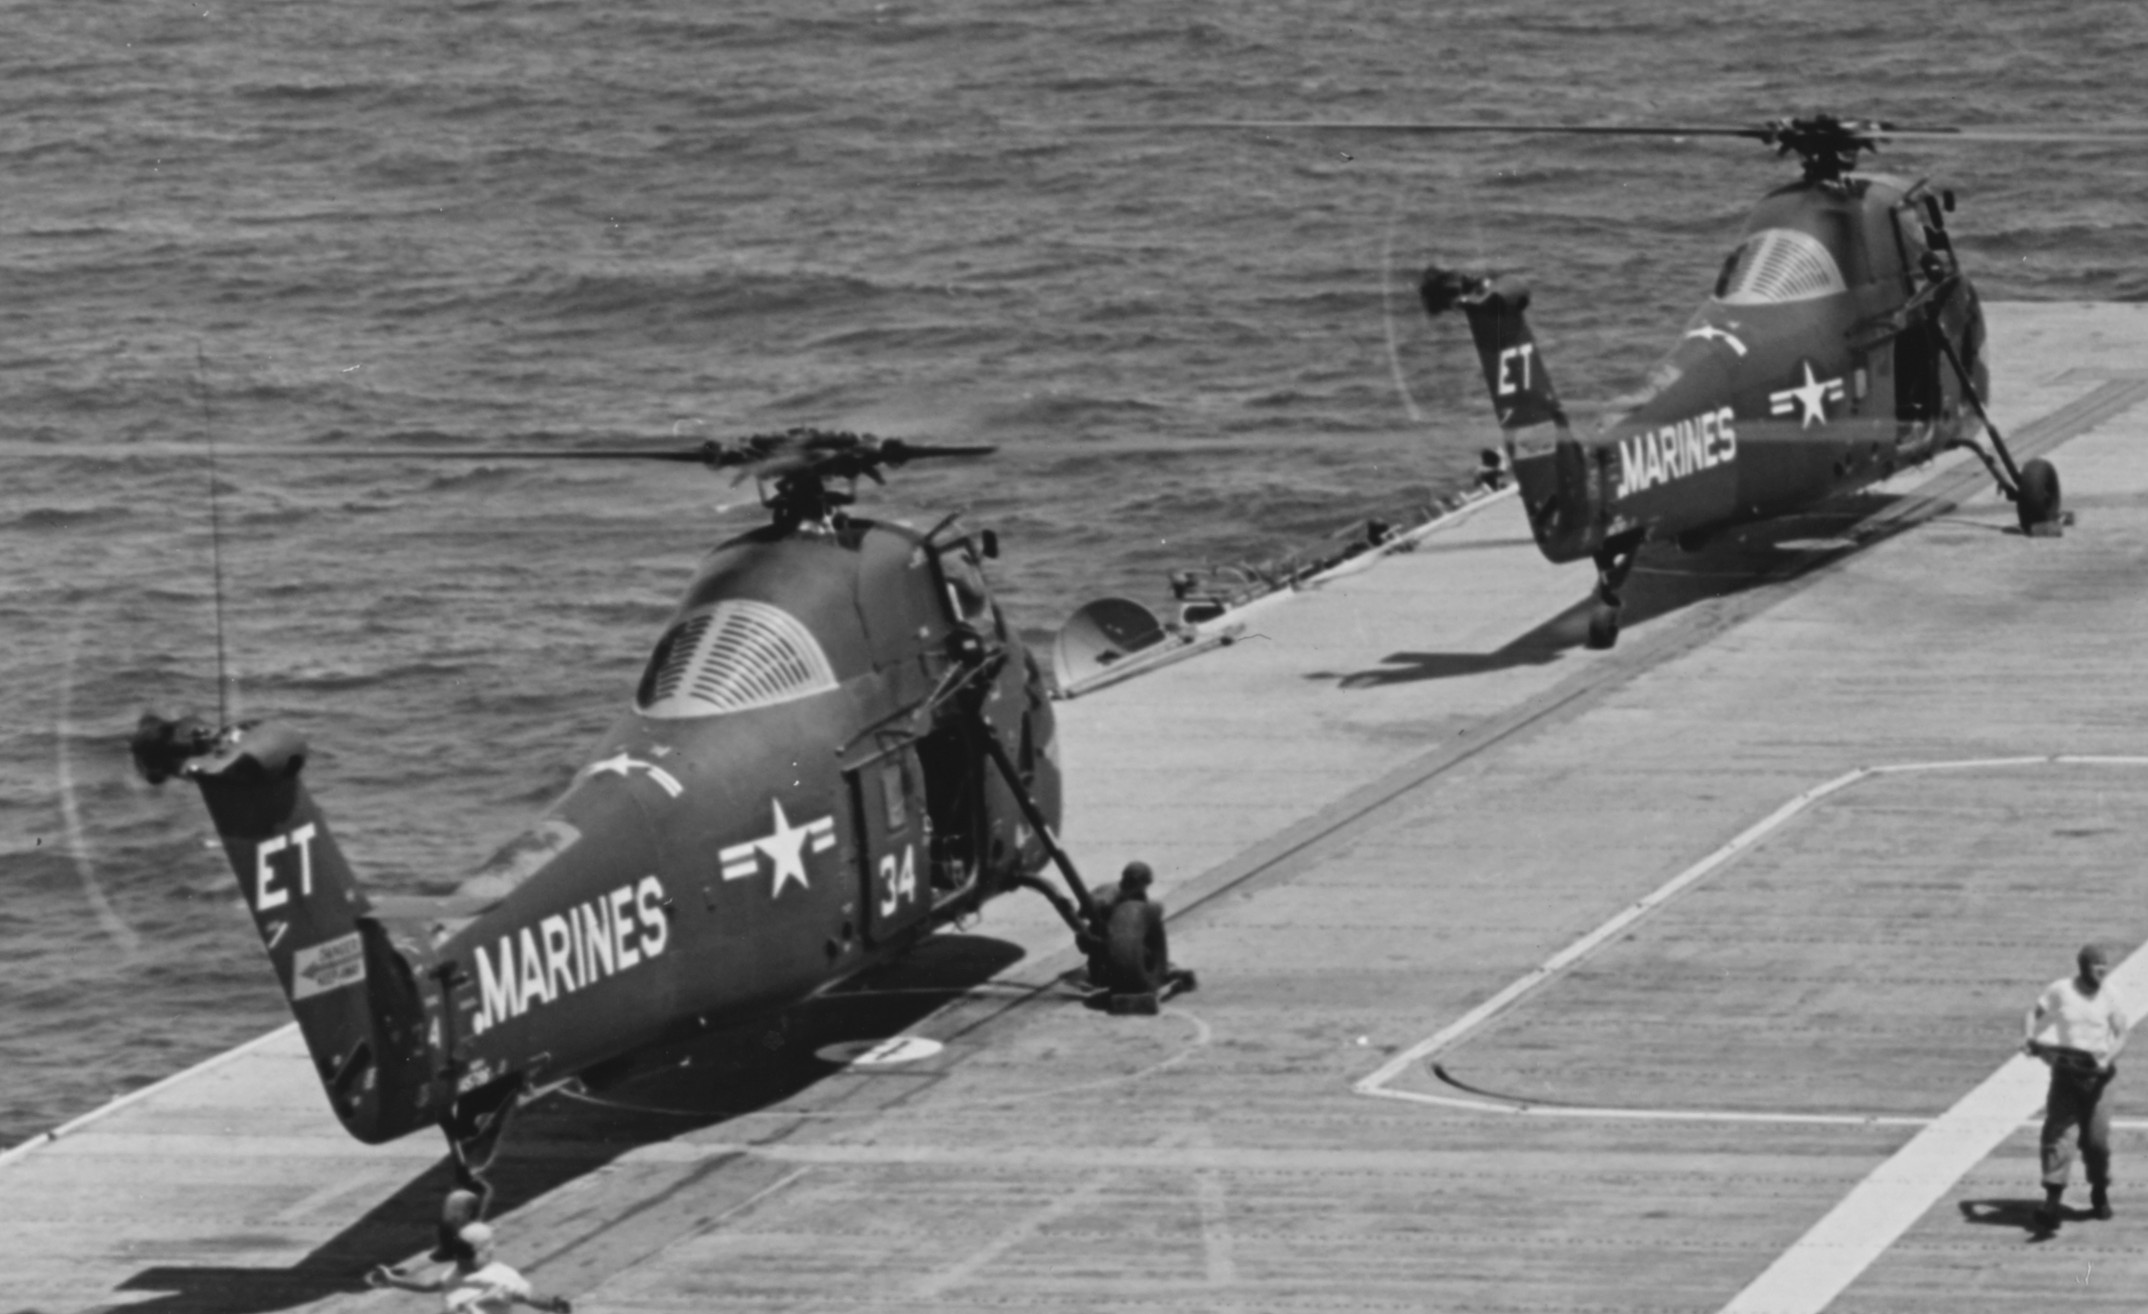 hmr(l)-262 flying tigers hus-1 seahorse marine light helicopter transport squadron 21a